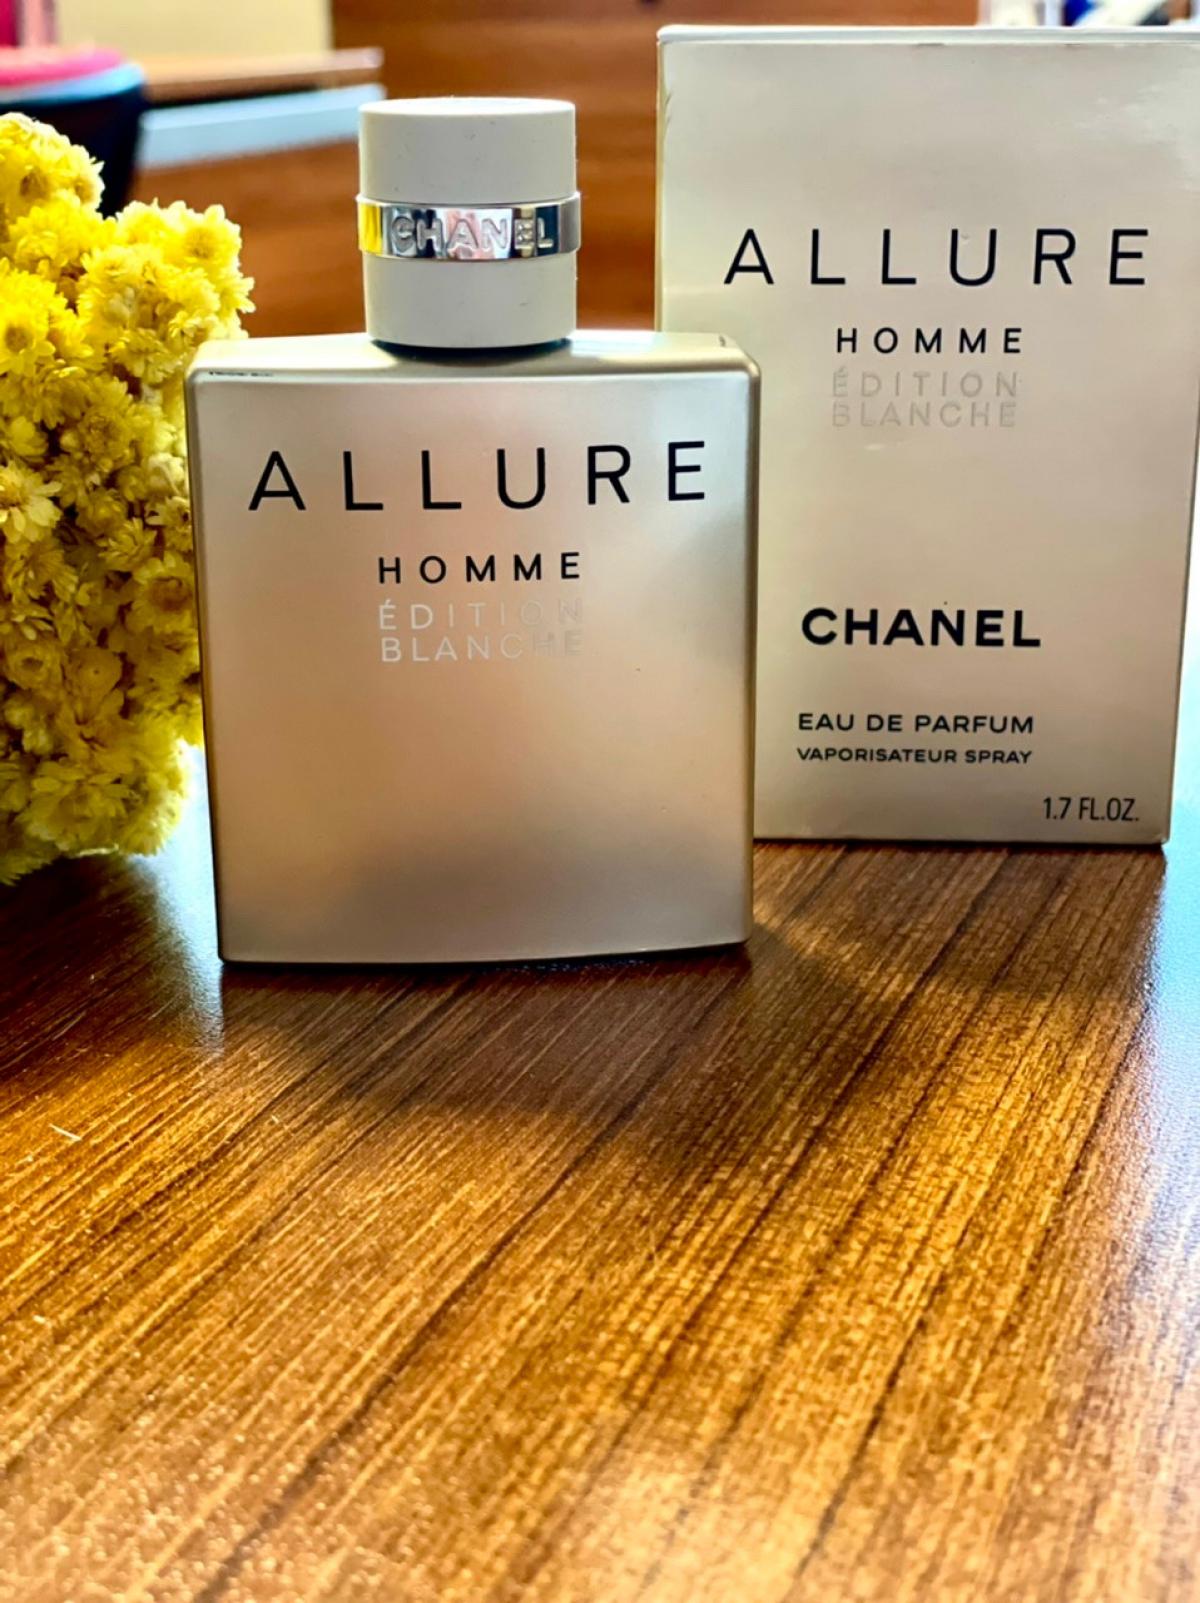 Chanel homme edition blanche. Chanel мужские. Allure homme Edition Blanche. Шанель Аллюр Бланш. Духи Chanel Allure homme Edition Blanche. Chanel Allure homme Sport Edition Blanche.